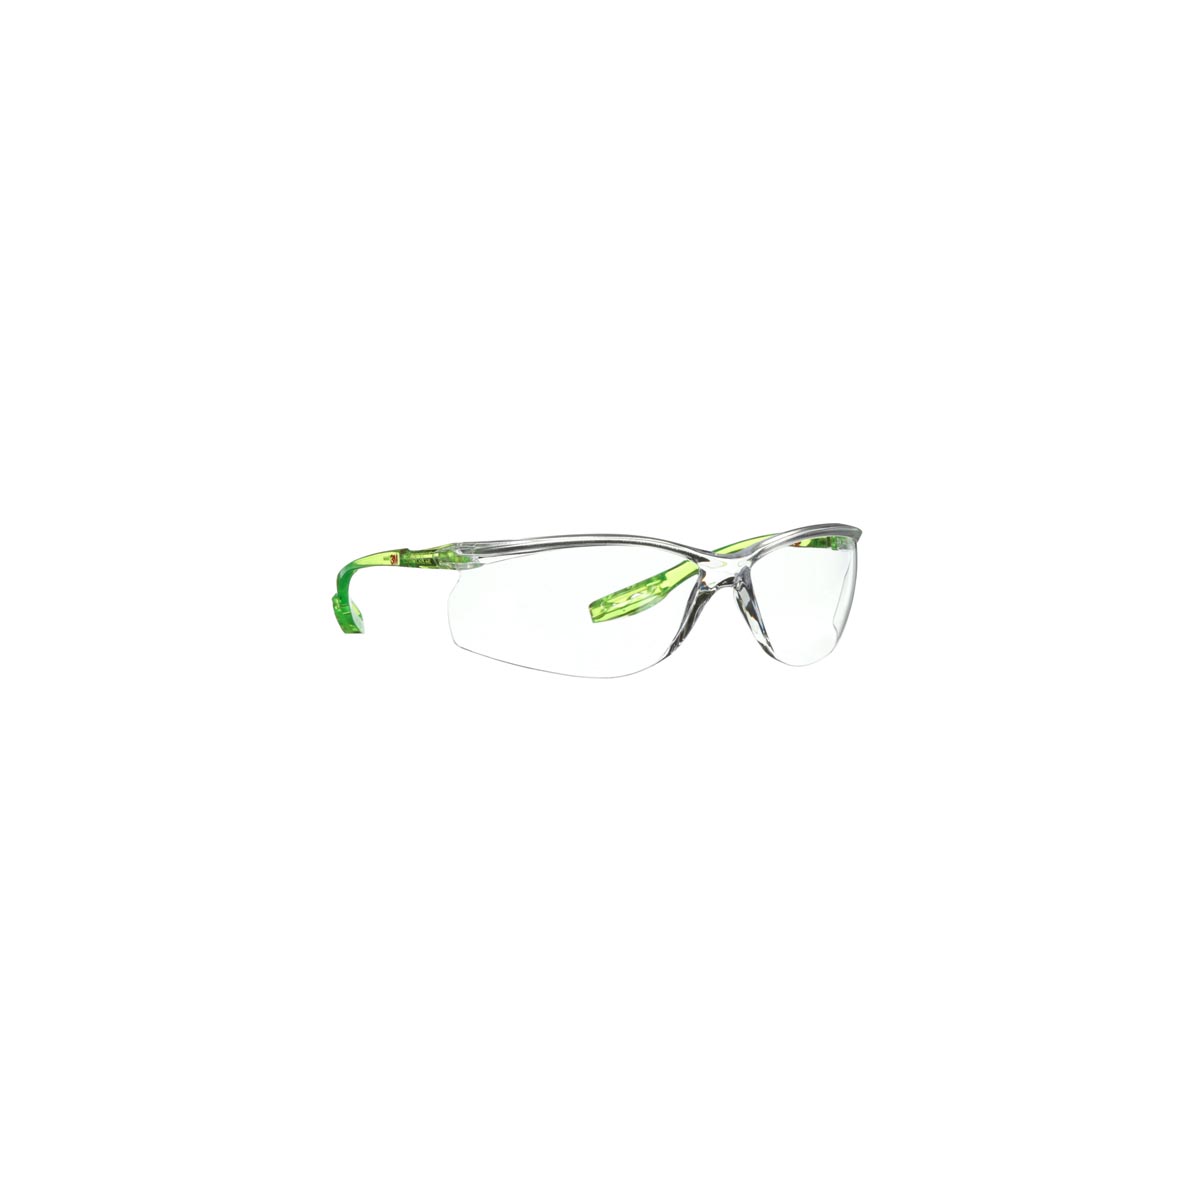 Airgas - 3MRS1101SGAF - 3M™ Solus™ Black Safety Glasses With Clear